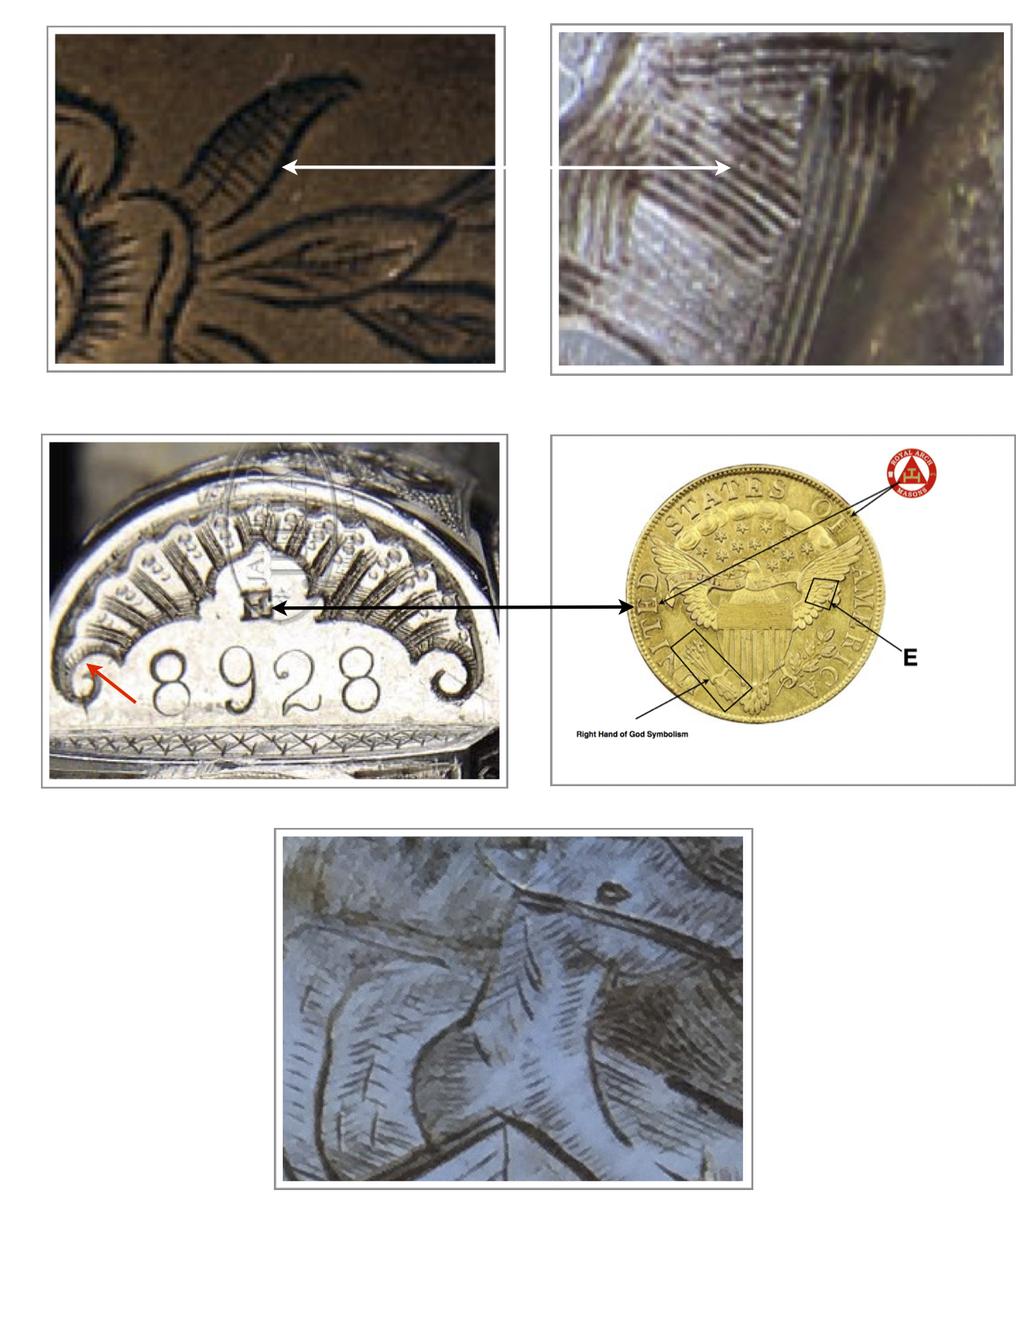 Ulrich Winchester Engraving Deep Relief Flower of Life Symbolism Rudolph Ulrich Makers Mark R The two box images are believed to be the first identified makers marks of Rudolph Ulrich.